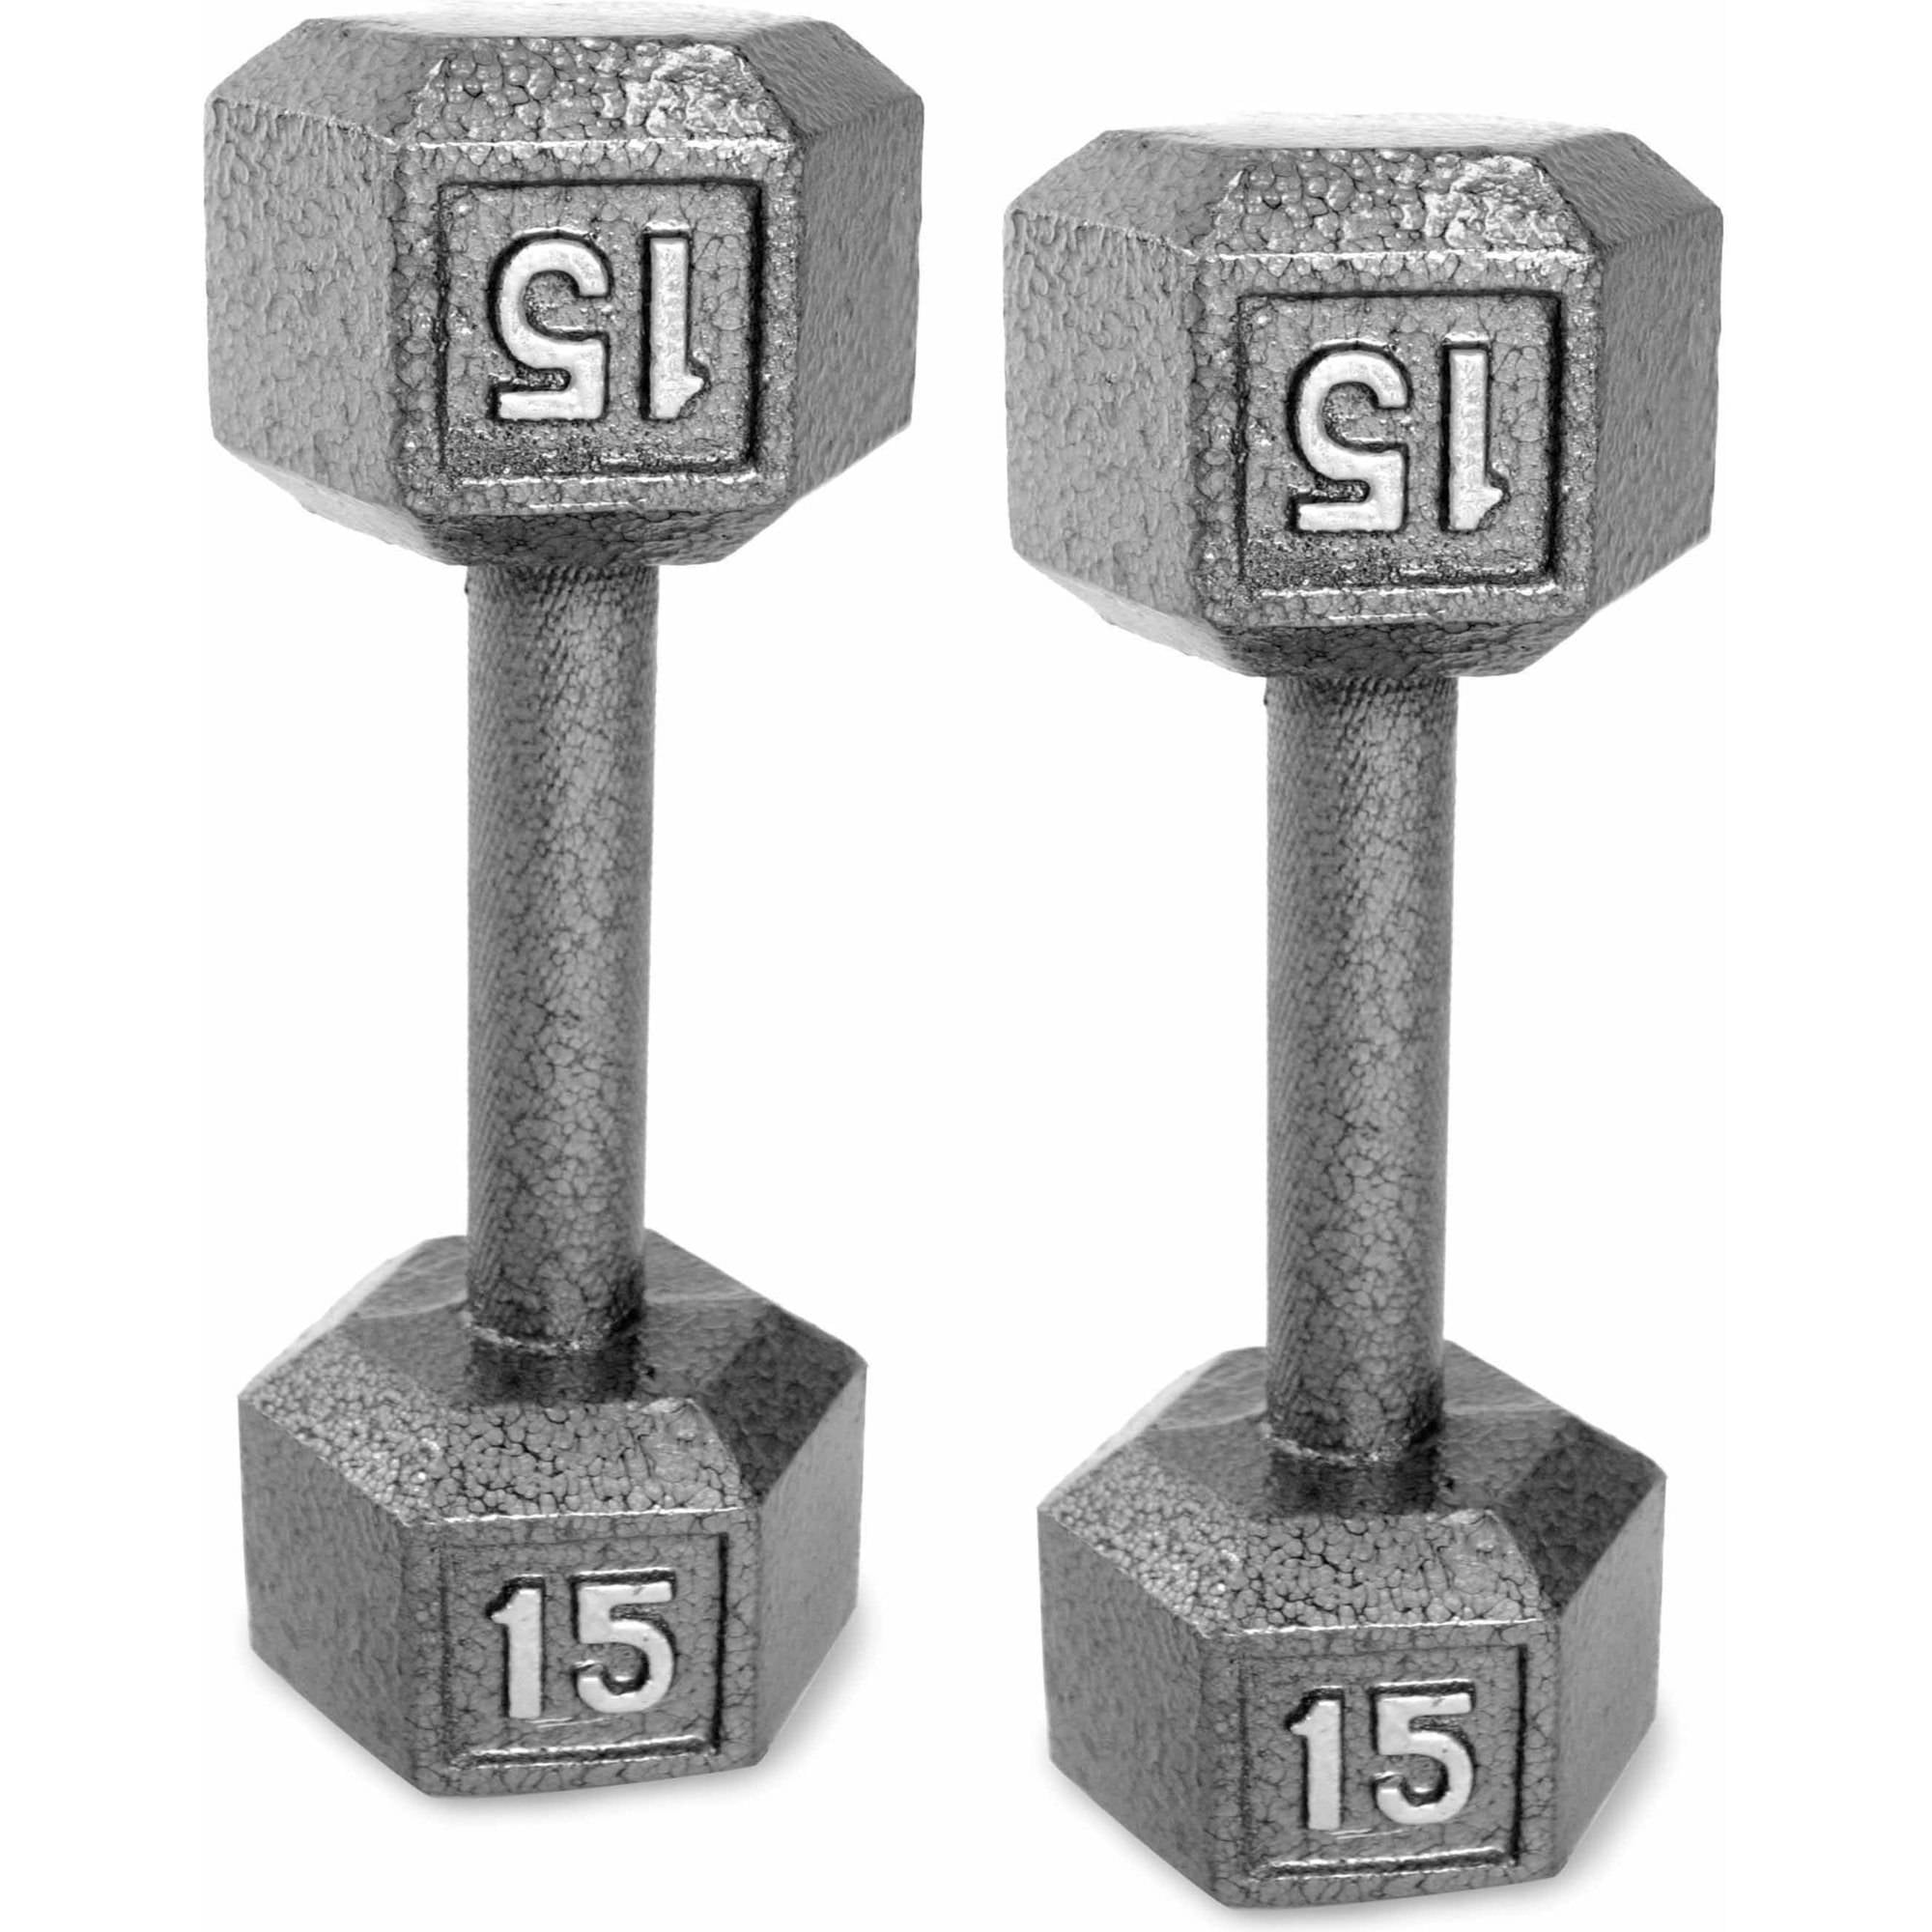 NEW 2 Cap Barbell 15Lb Pound Cast Iron Hex Dumbbells Pair Weights 30LBS Total 